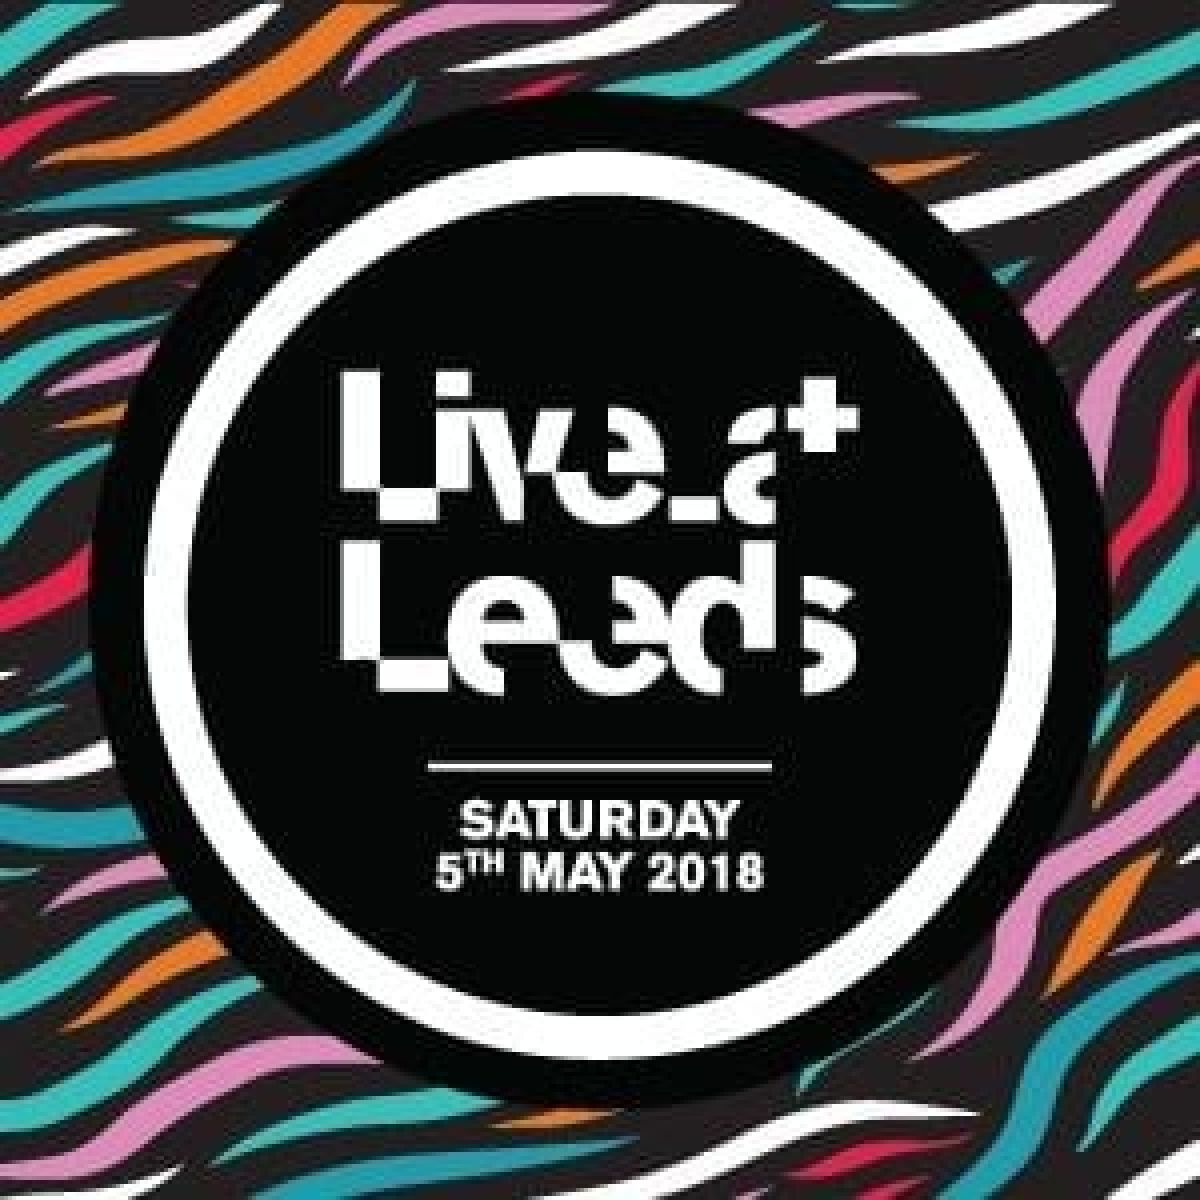 Top seven acts at Live at Leeds this year